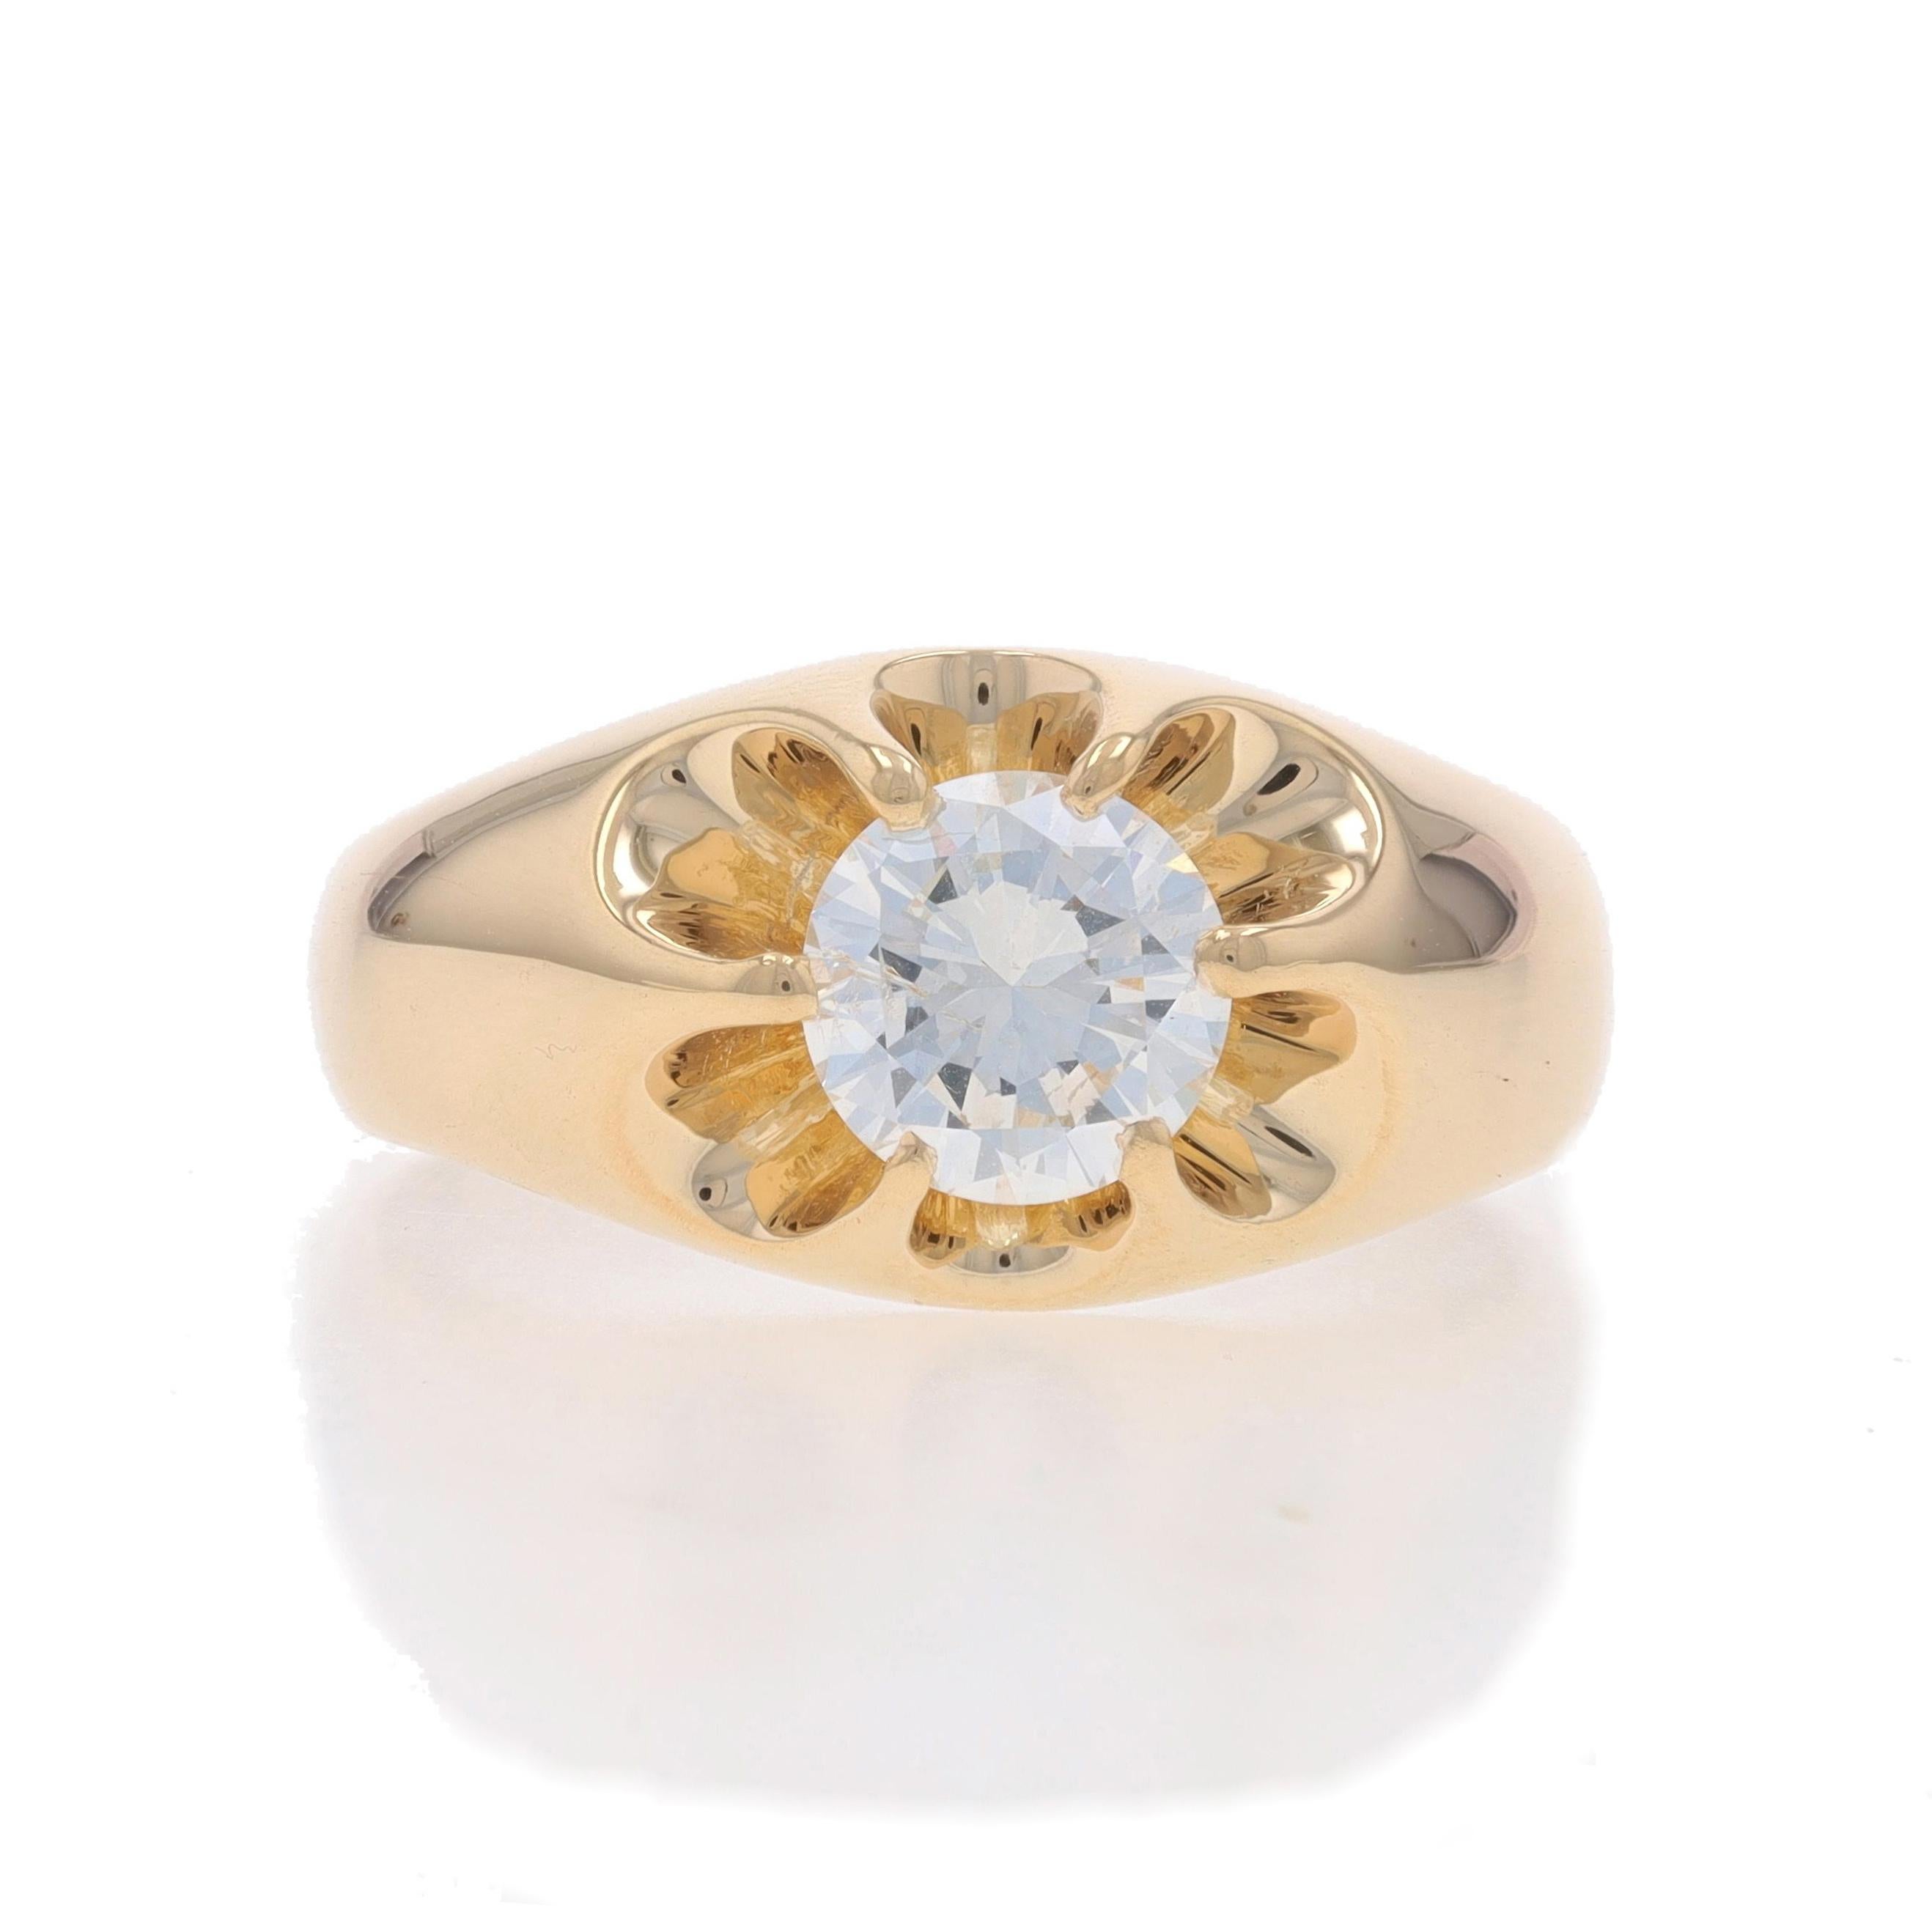 Size: 10 1/2
Sizing Fee: Up 3 sizes for $50 or Down 1 1/2 sizes for $40

Metal Content: 14k Yellow Gold

Stone Information

Natural Diamond
Carat(s): 1.50ct
Cut: Round Brilliant
Color: G
Clarity: I1

Total Carats: 1.50ct

Style: Solitaire
Features: